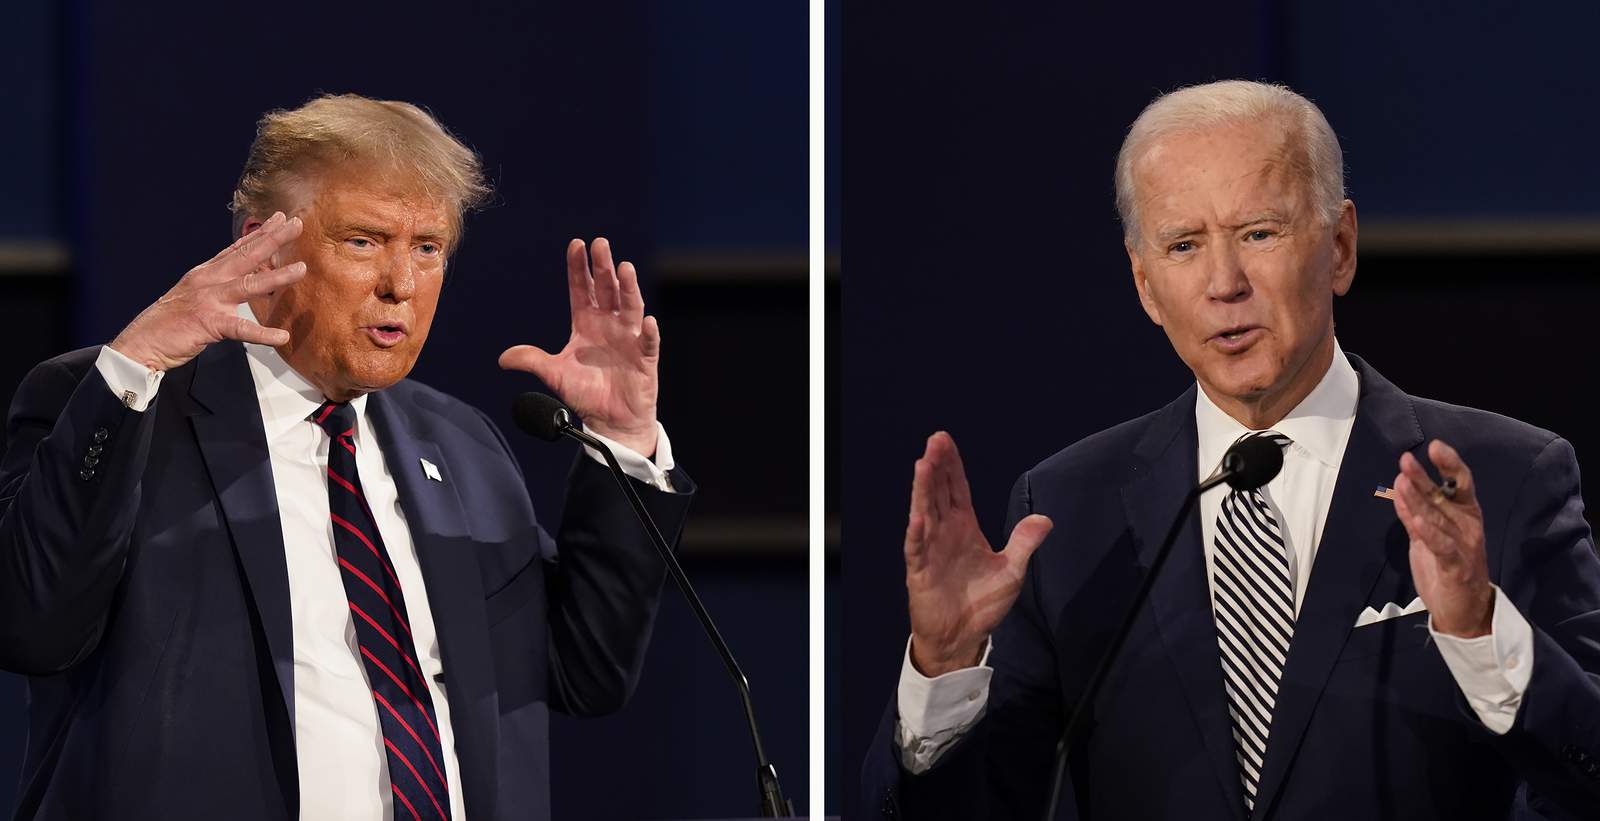 Poll: Biden bolsters lead over Trump in Michigan after first debate